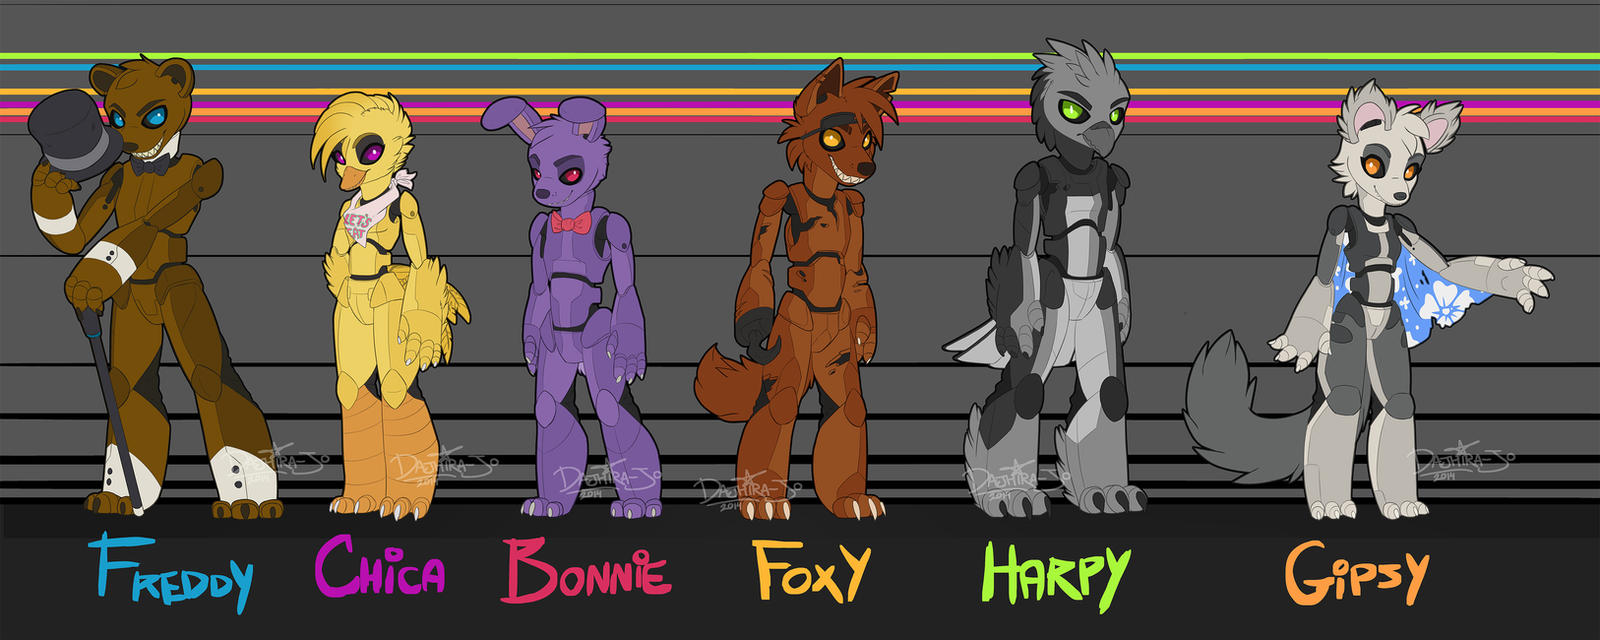 Five Nights at Freddy's by Noxivaga on DeviantArt